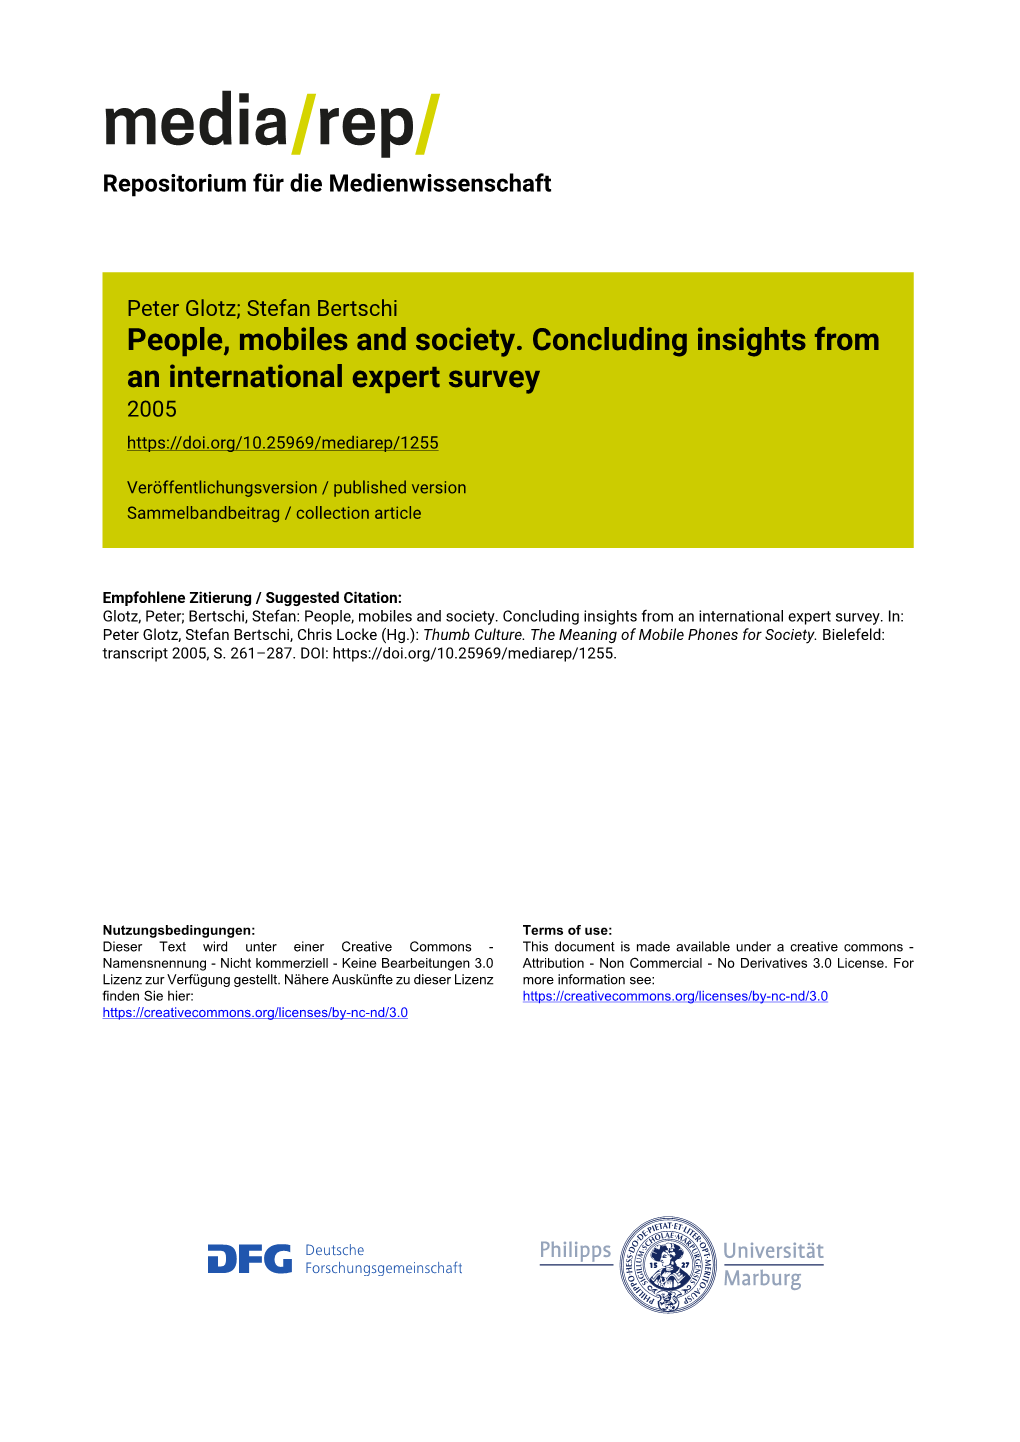 People, Mobiles and Society. Concluding Insights from an International Expert Survey 2005